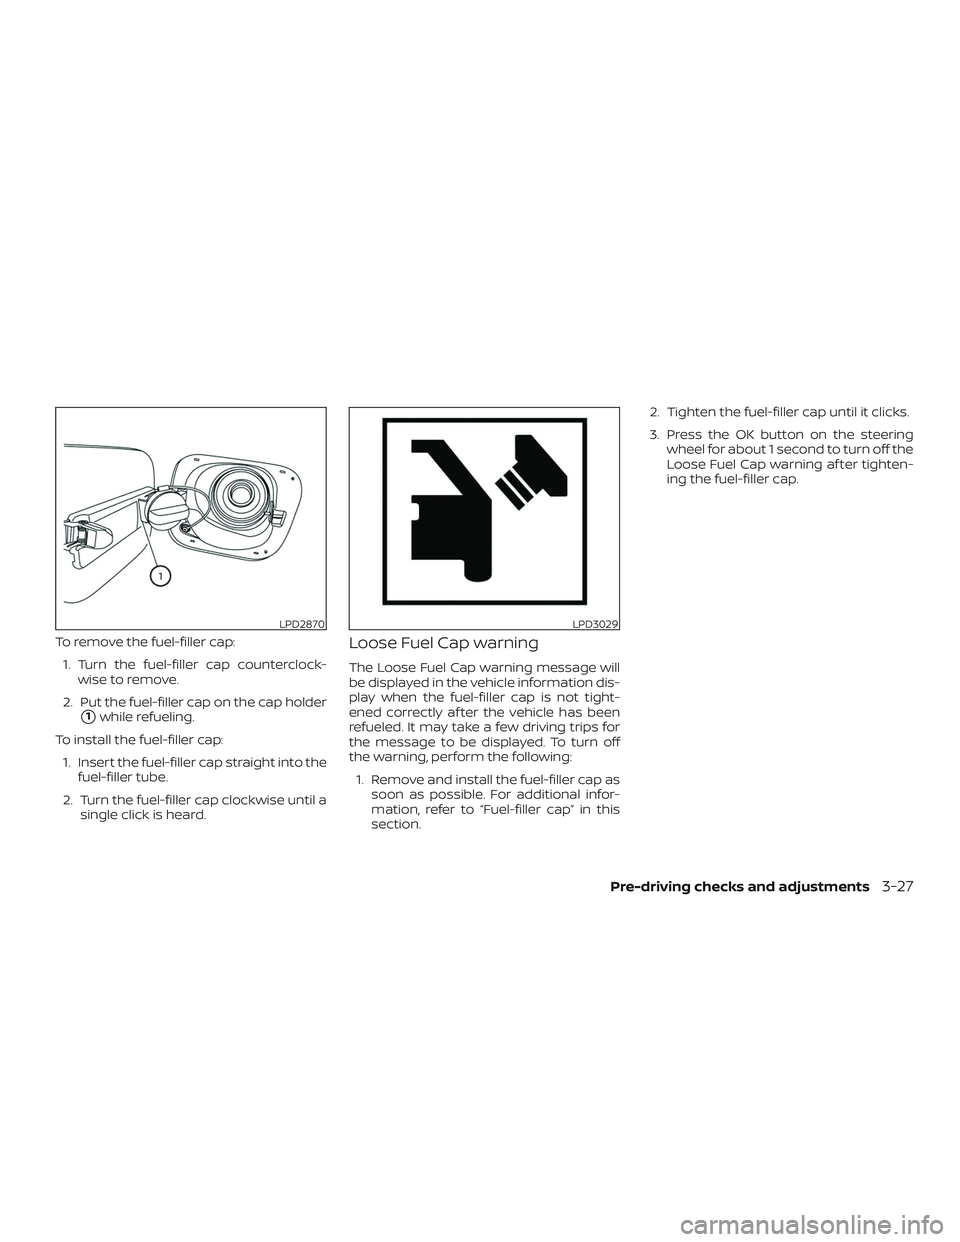 NISSAN ALTIMA 2020  Owner´s Manual To remove the fuel-filler cap:1. Turn the fuel-filler cap counterclock- wise to remove.
2. Put the fuel-filler cap on the cap holder
1while refueling.
To install the fuel-filler cap: 1. Insert the fu